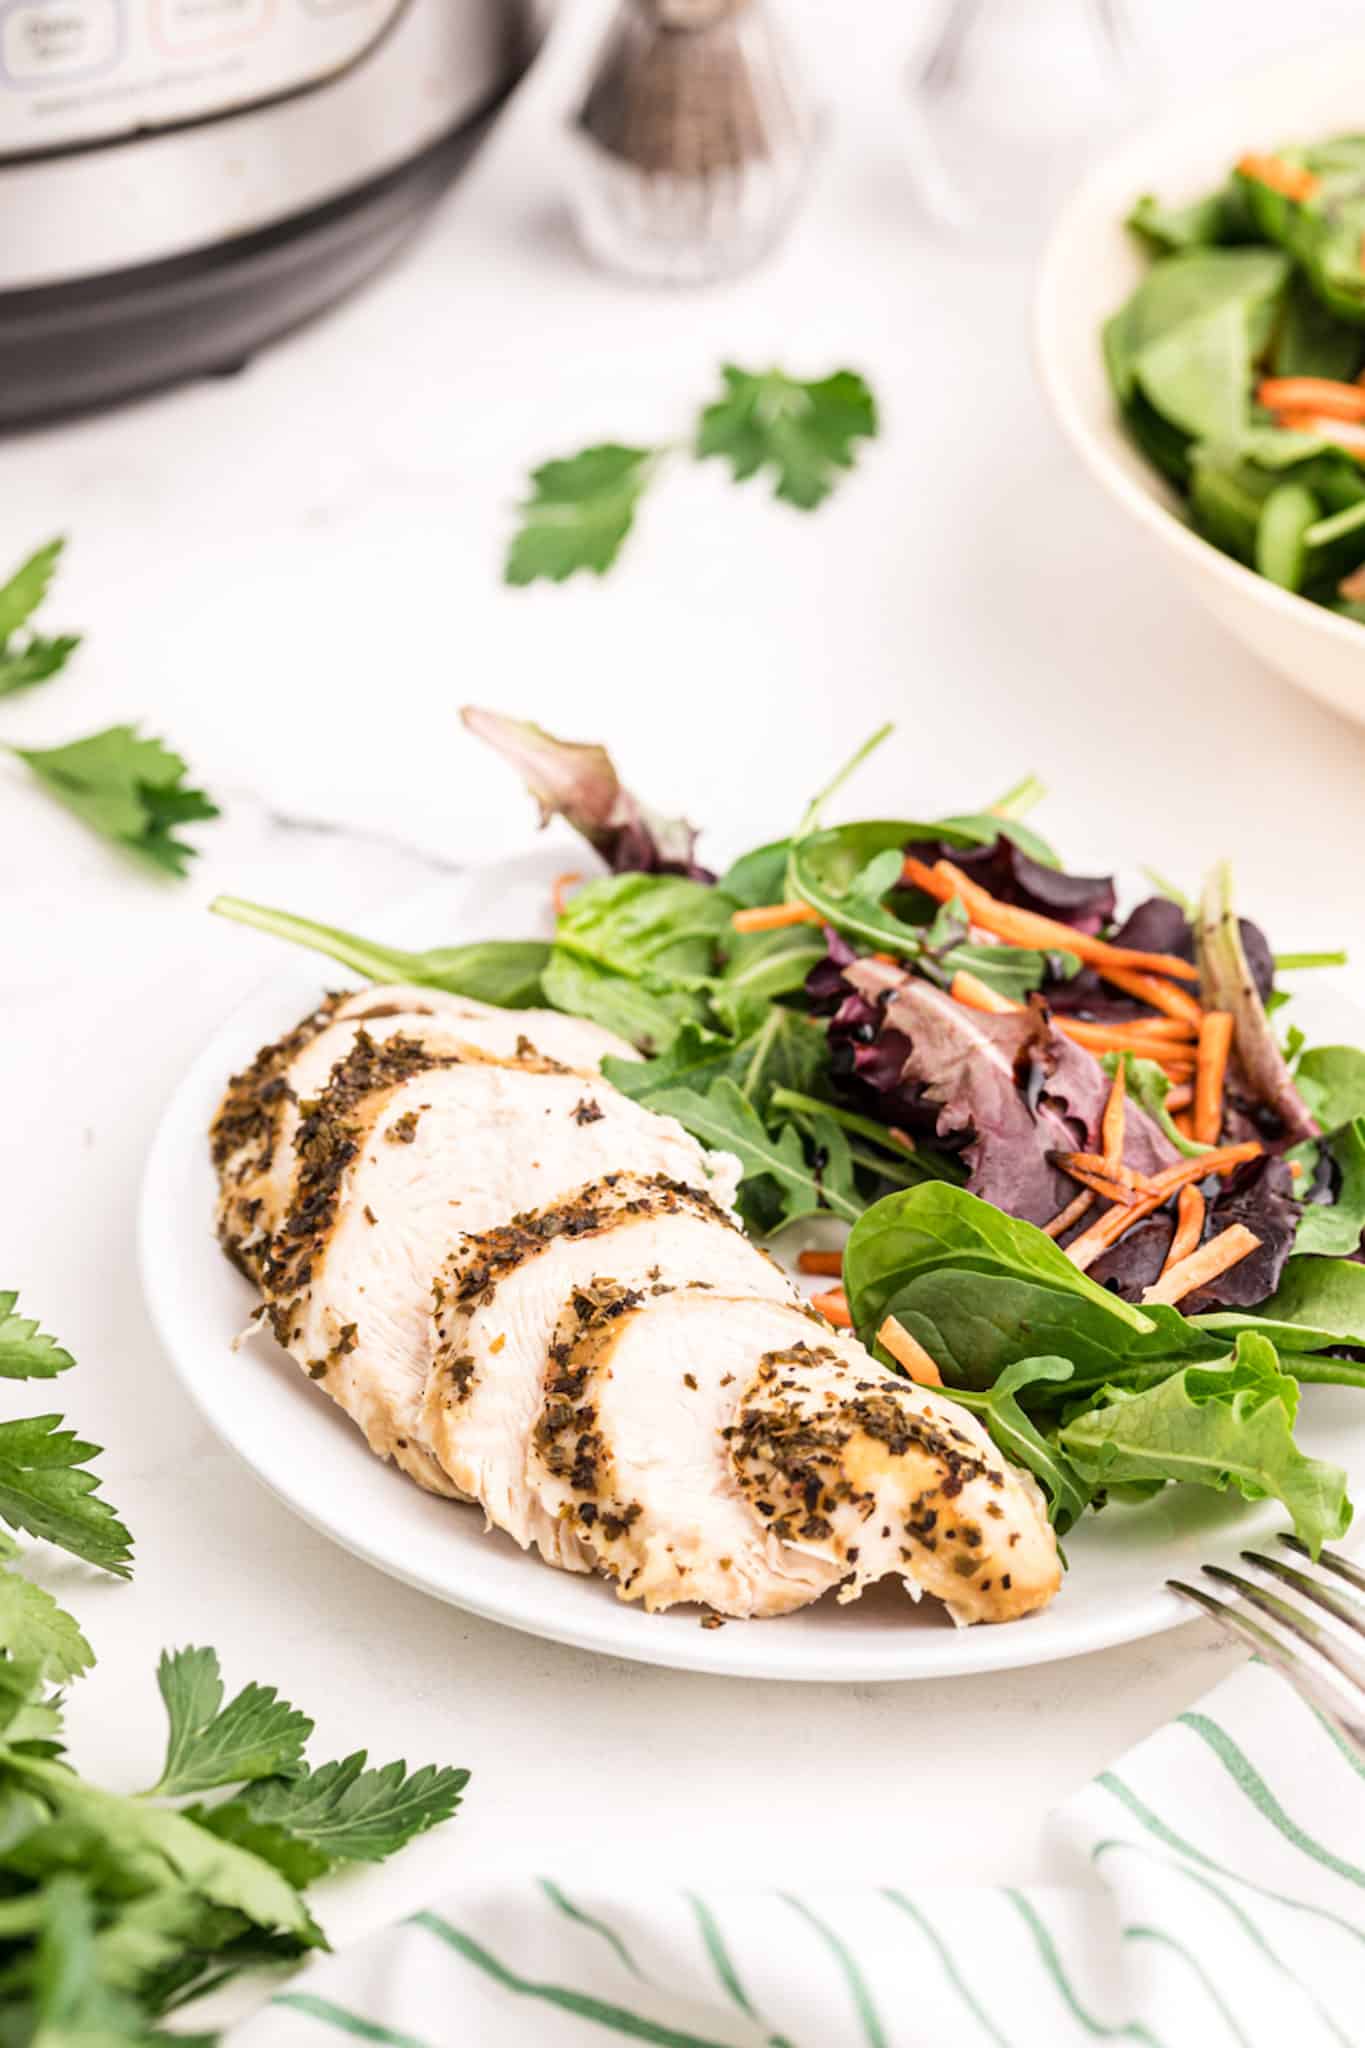 Sliced instant pot turkey tenderloin on a plate with green salad.